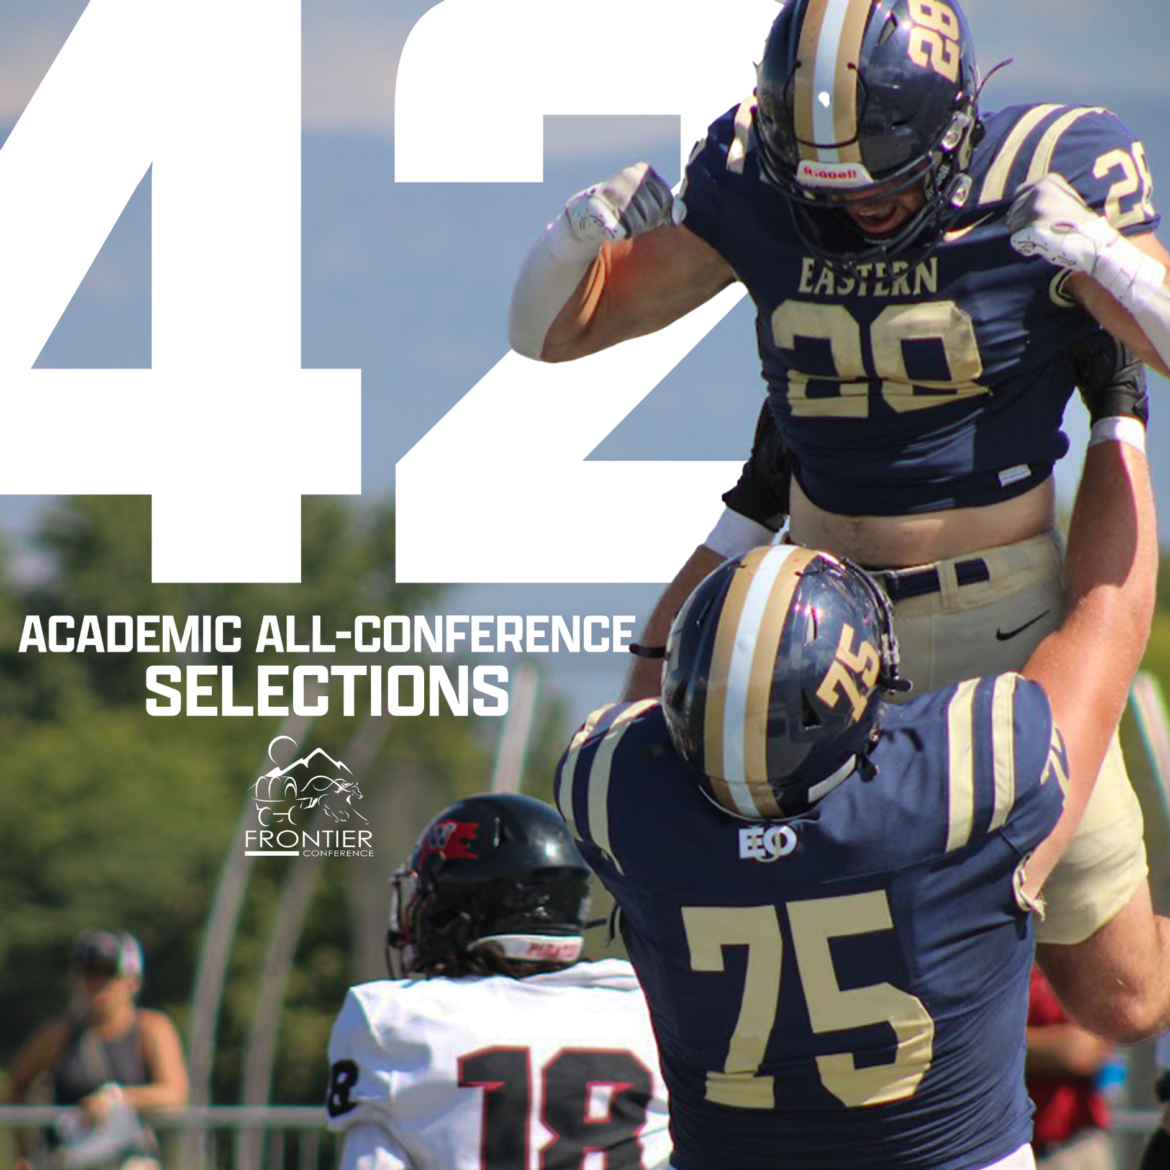 42 Student-Athletes Earn Football Academic All-Conference Honors